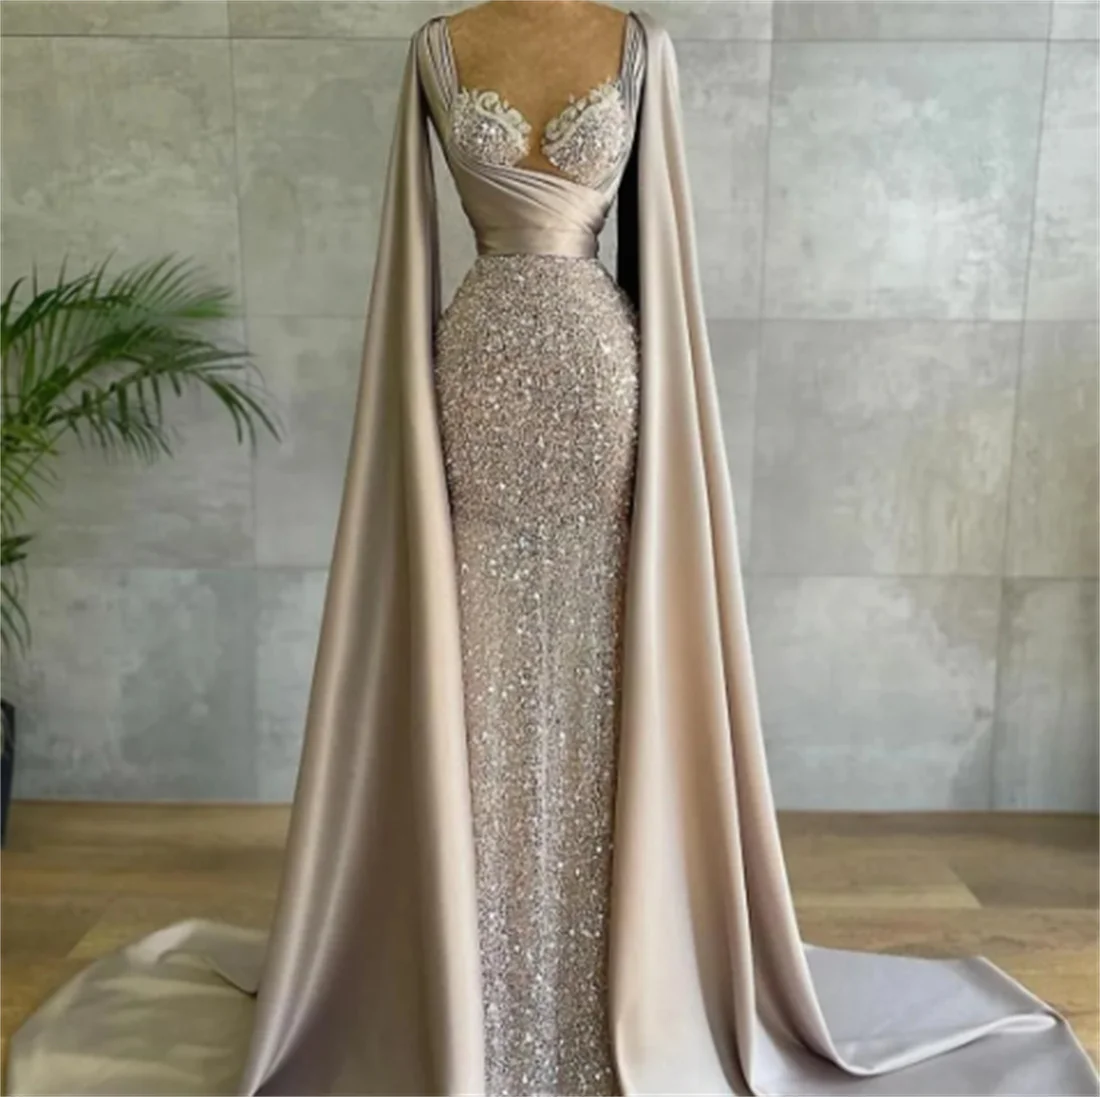 

Luxury Arabic Glitter Sequined Evening Dress For Women With Cape Ruched High Quality Lace Appliques Sweetheart Formal Prom Gown